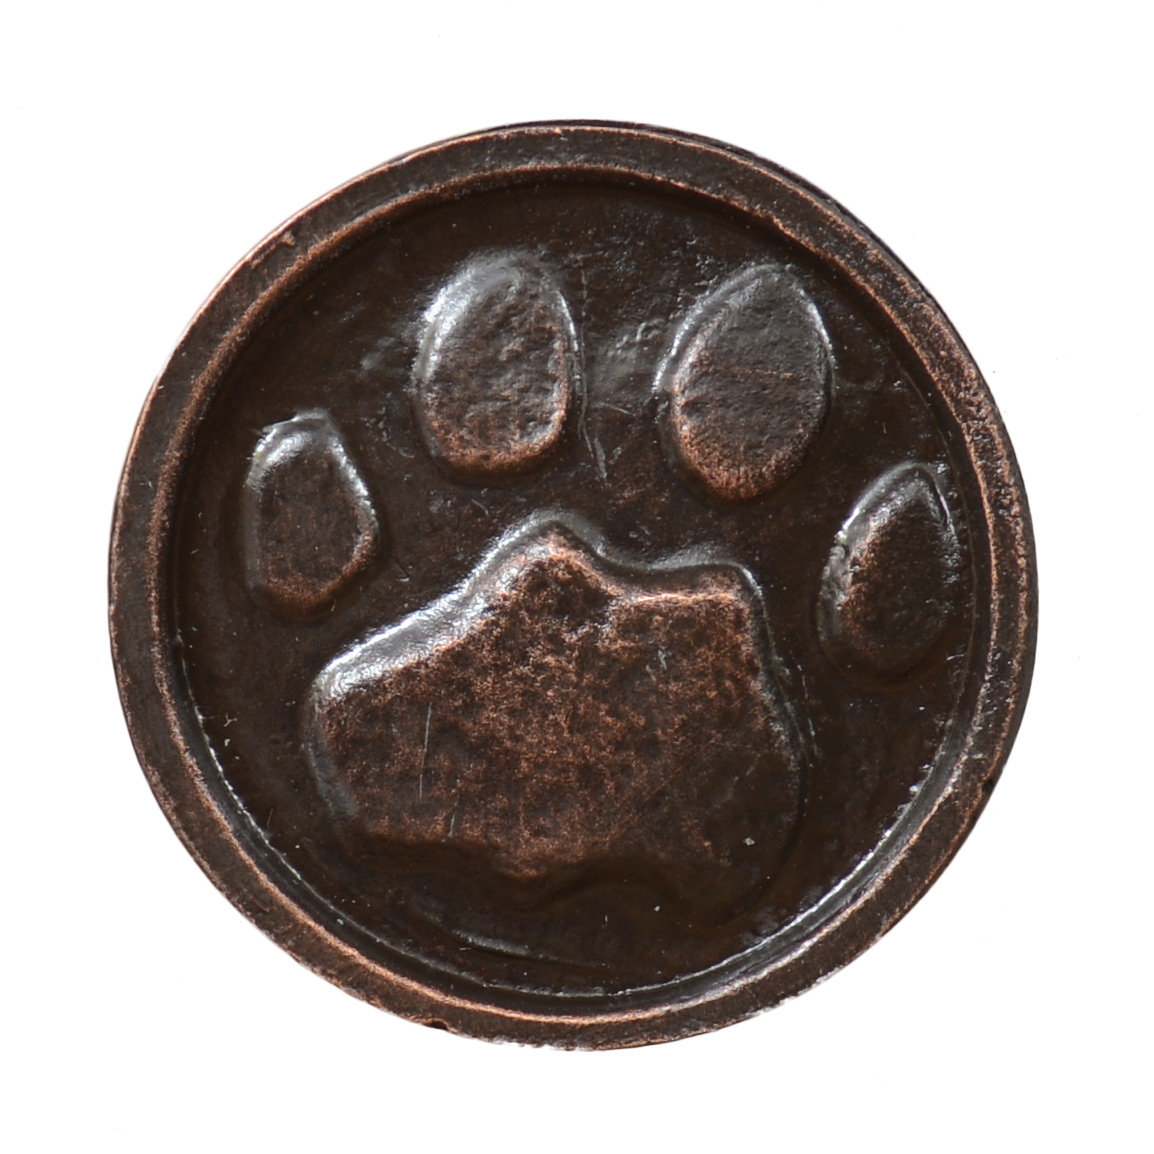 Paw Print Cabinet Knobs Maribointelligentsolutionsco pertaining to dimensions 1154 X 1154